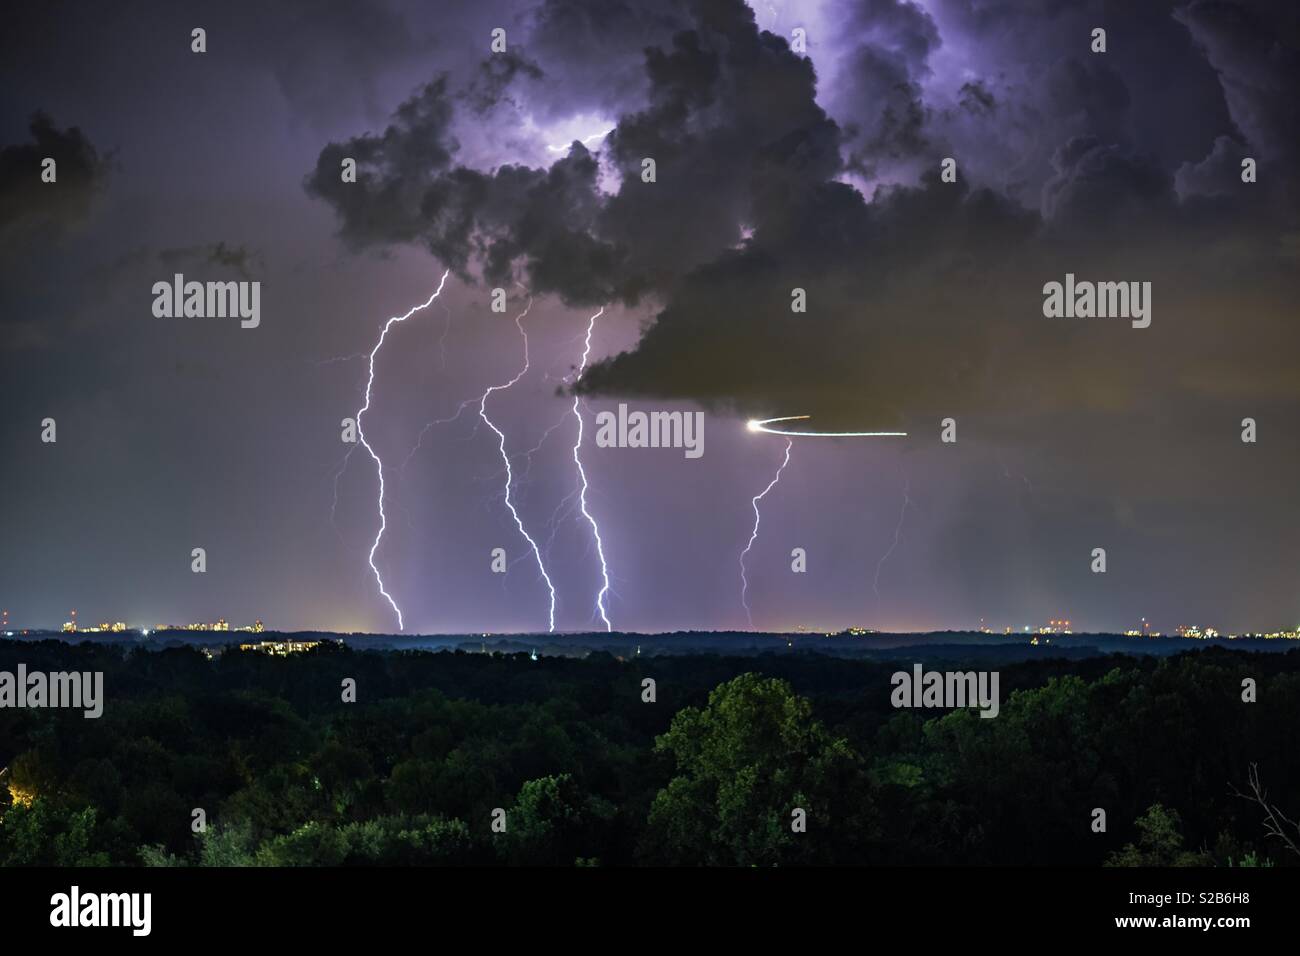 Lightning crashing as a helicopter flees Stock Photo